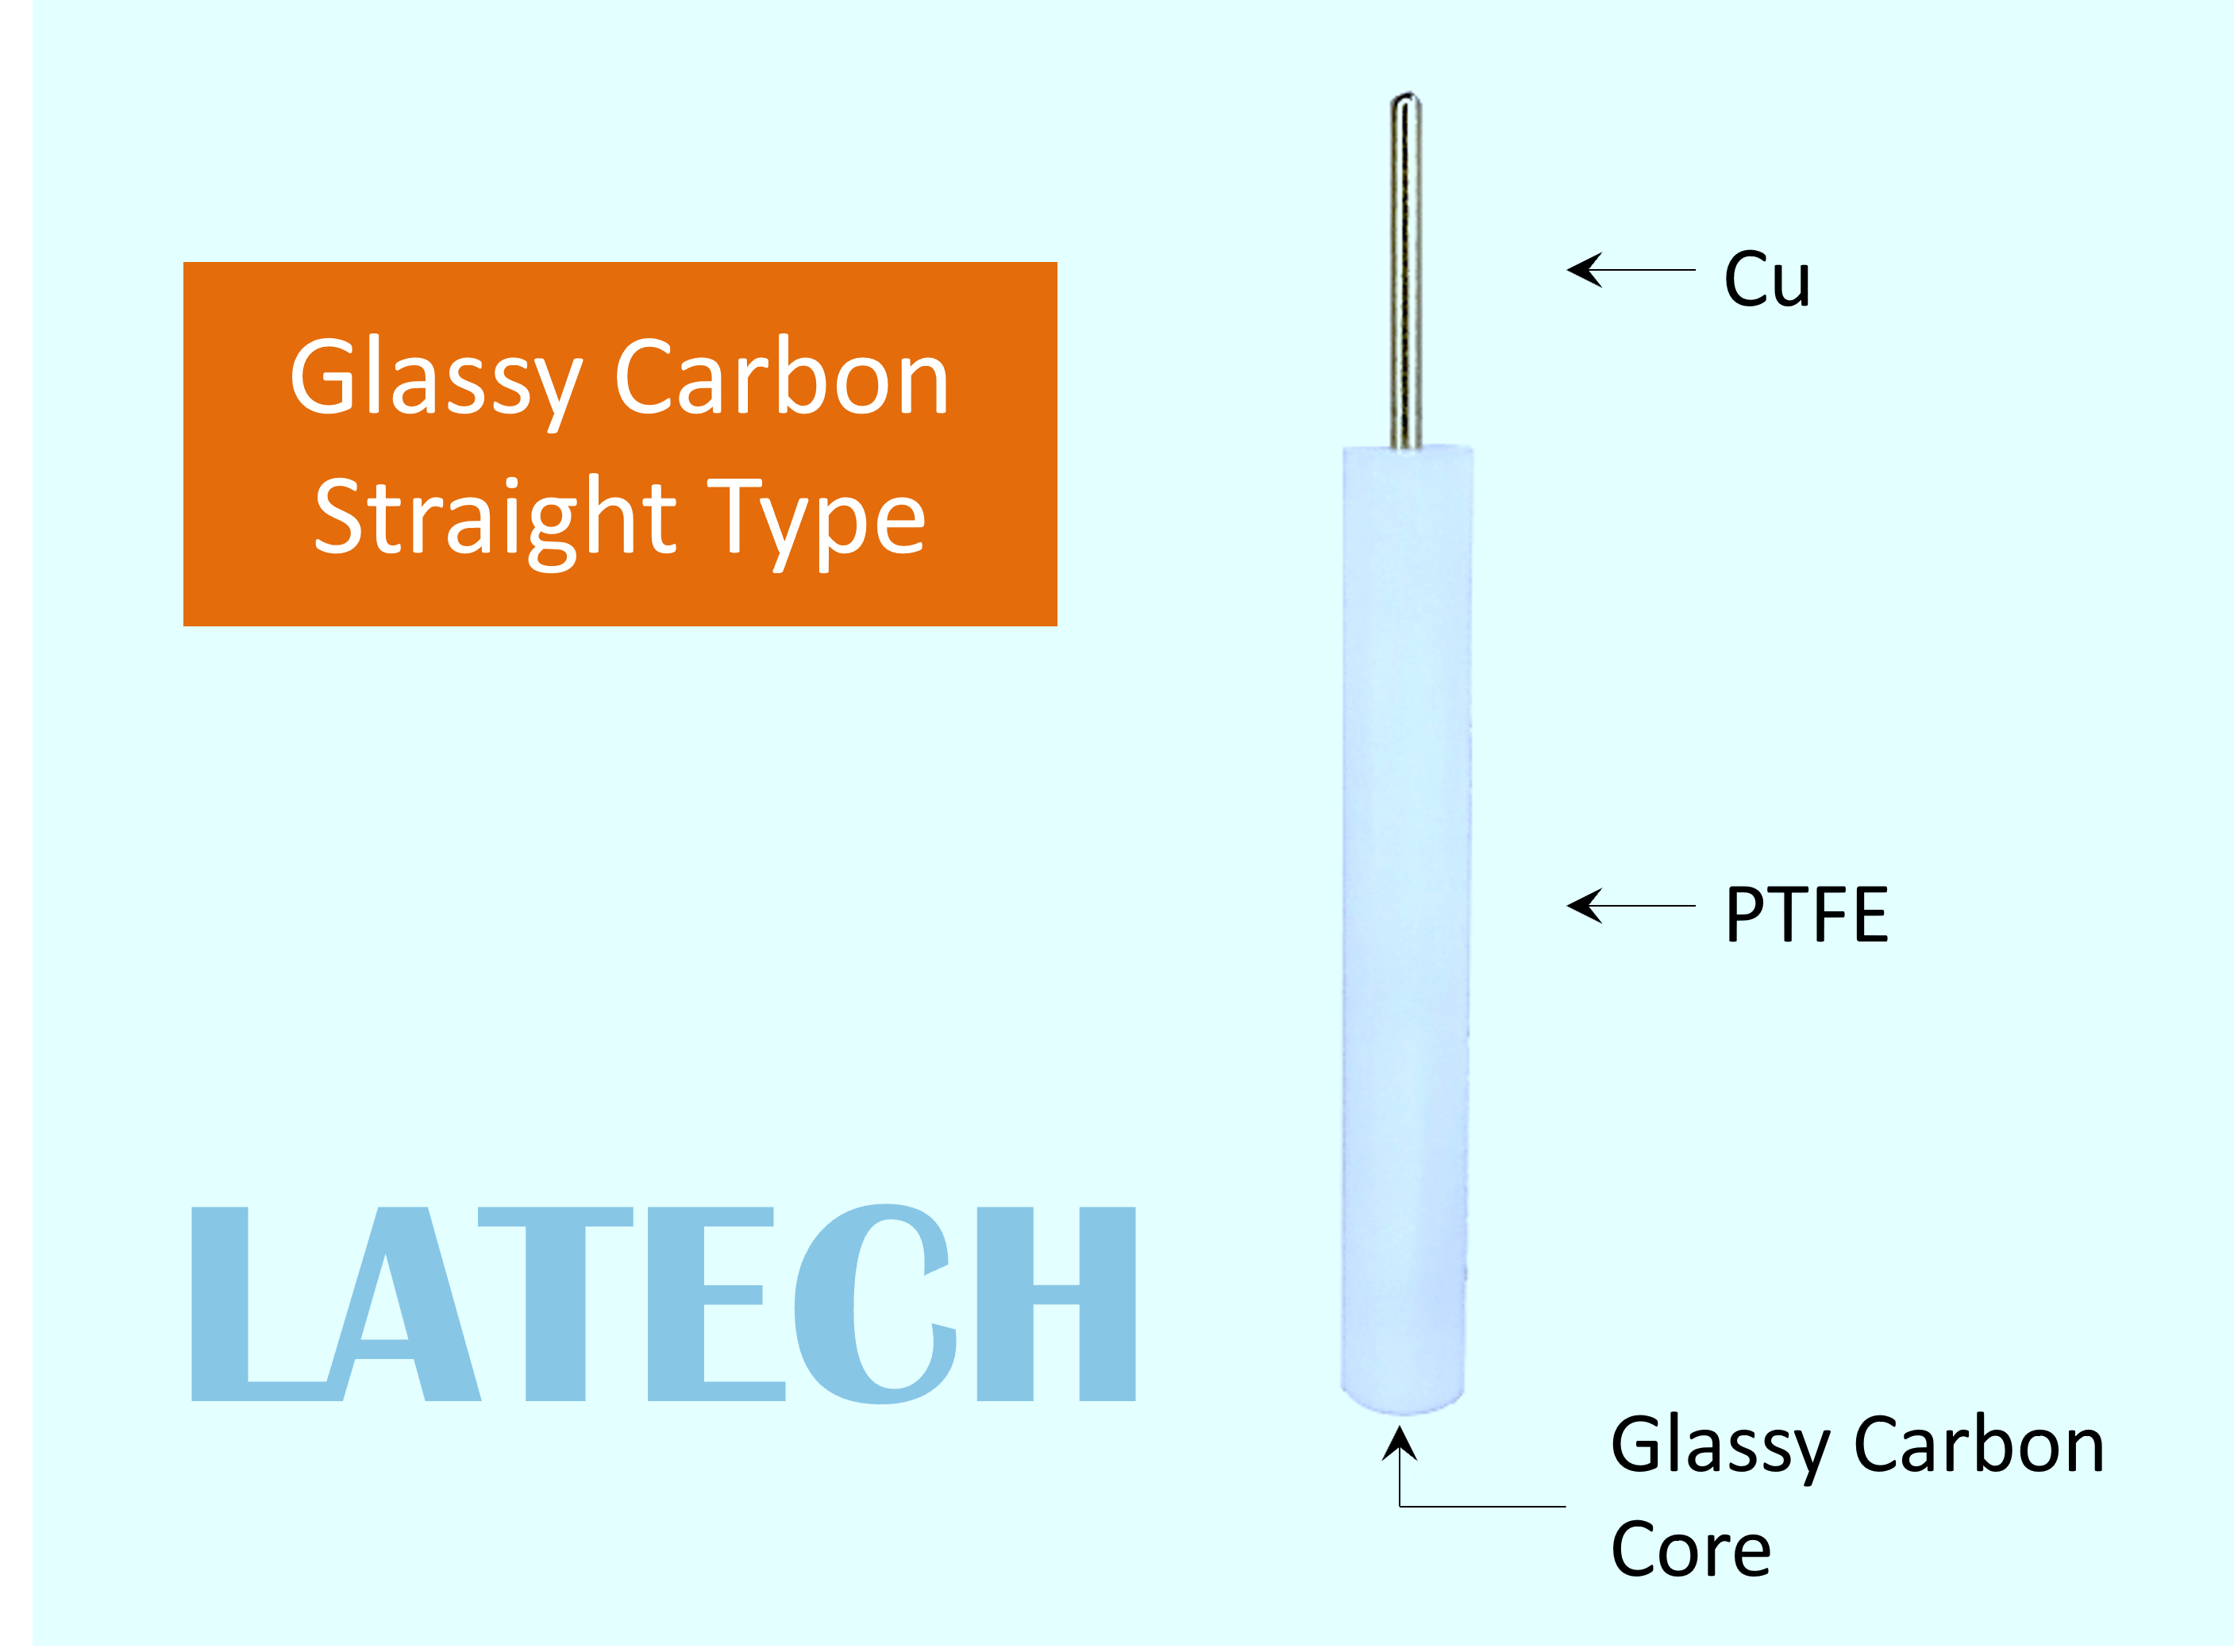 Glassy Carbon Straight Type Latech.png